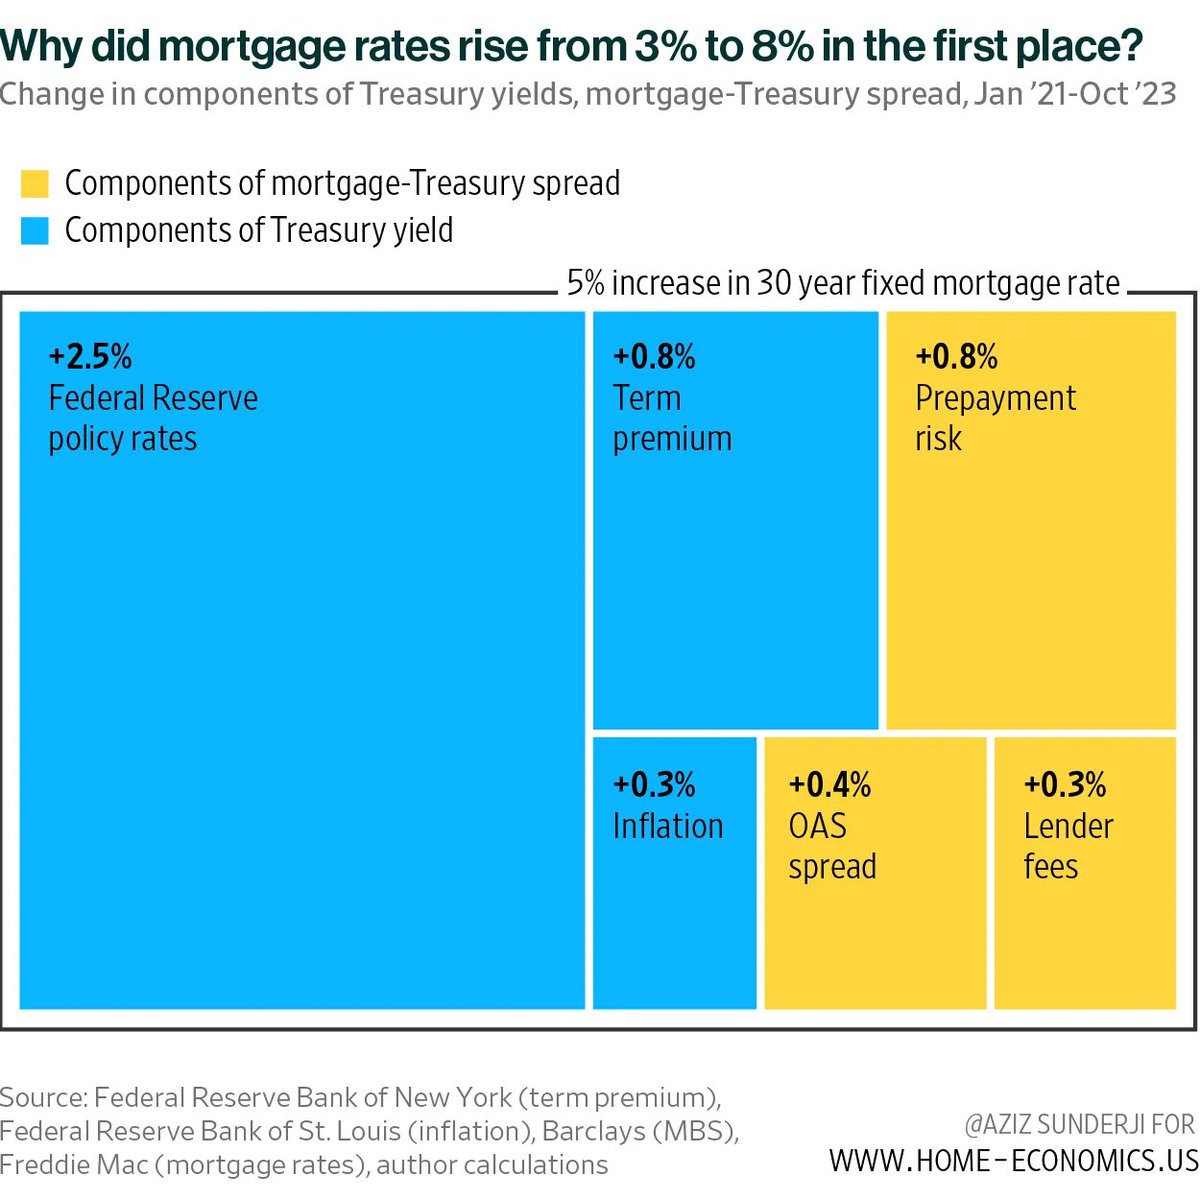 From @jeannasmialek: 'If the Fed does leave interest rates higher this year and in years to come, it will mean that the cheap mortgage rates like those that prevailed in the 2010s are not coming back.' Agree. Policy drove mortgage rates from 3% ➡️ 8% and won't entirely reverse.